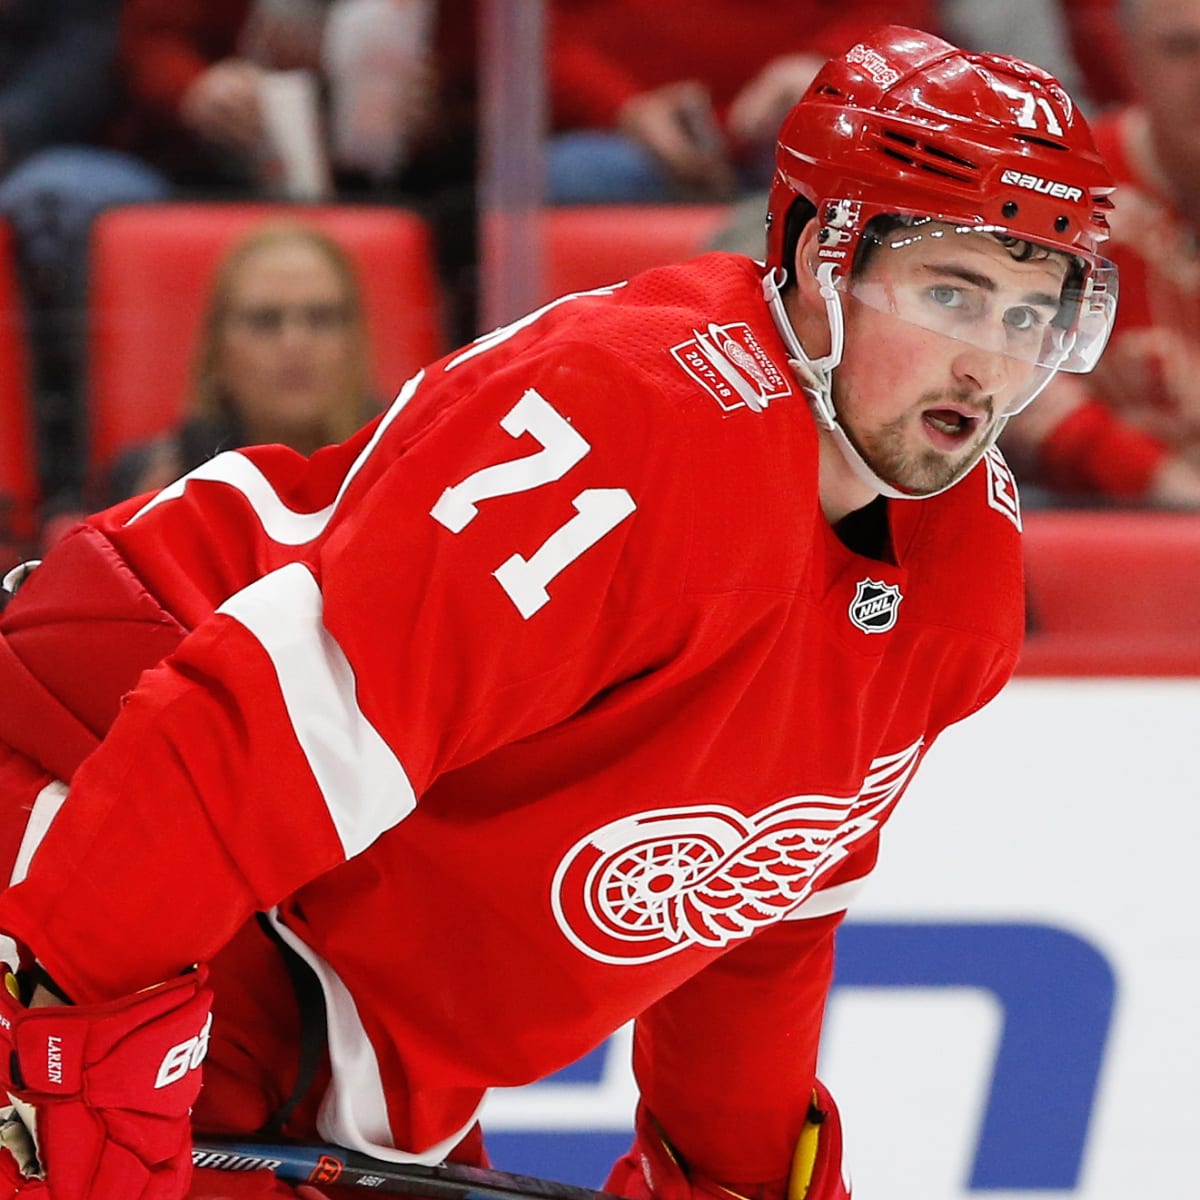 Dylan Larkin's choice: Another year at Michigan or Red Wings contract?